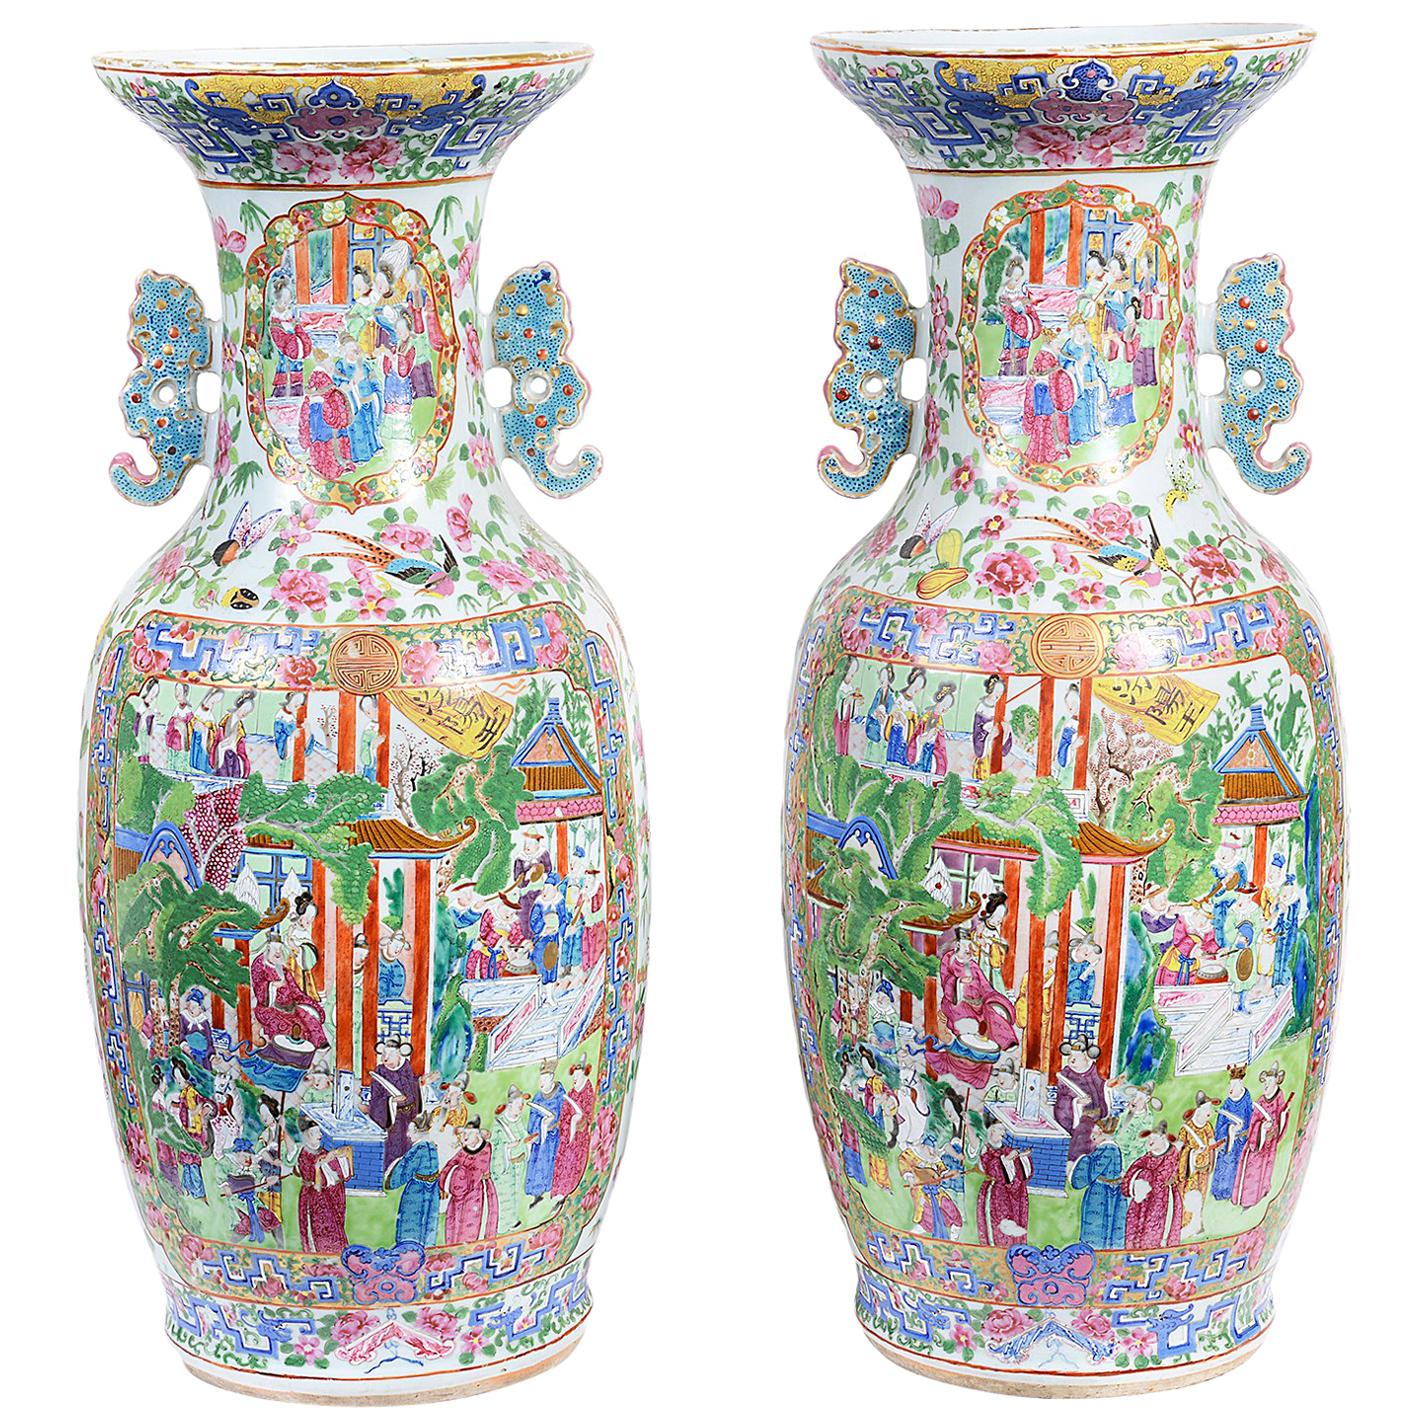 Large Pair Chinese Cantonese / Rose Medallion Vases, 19th Century